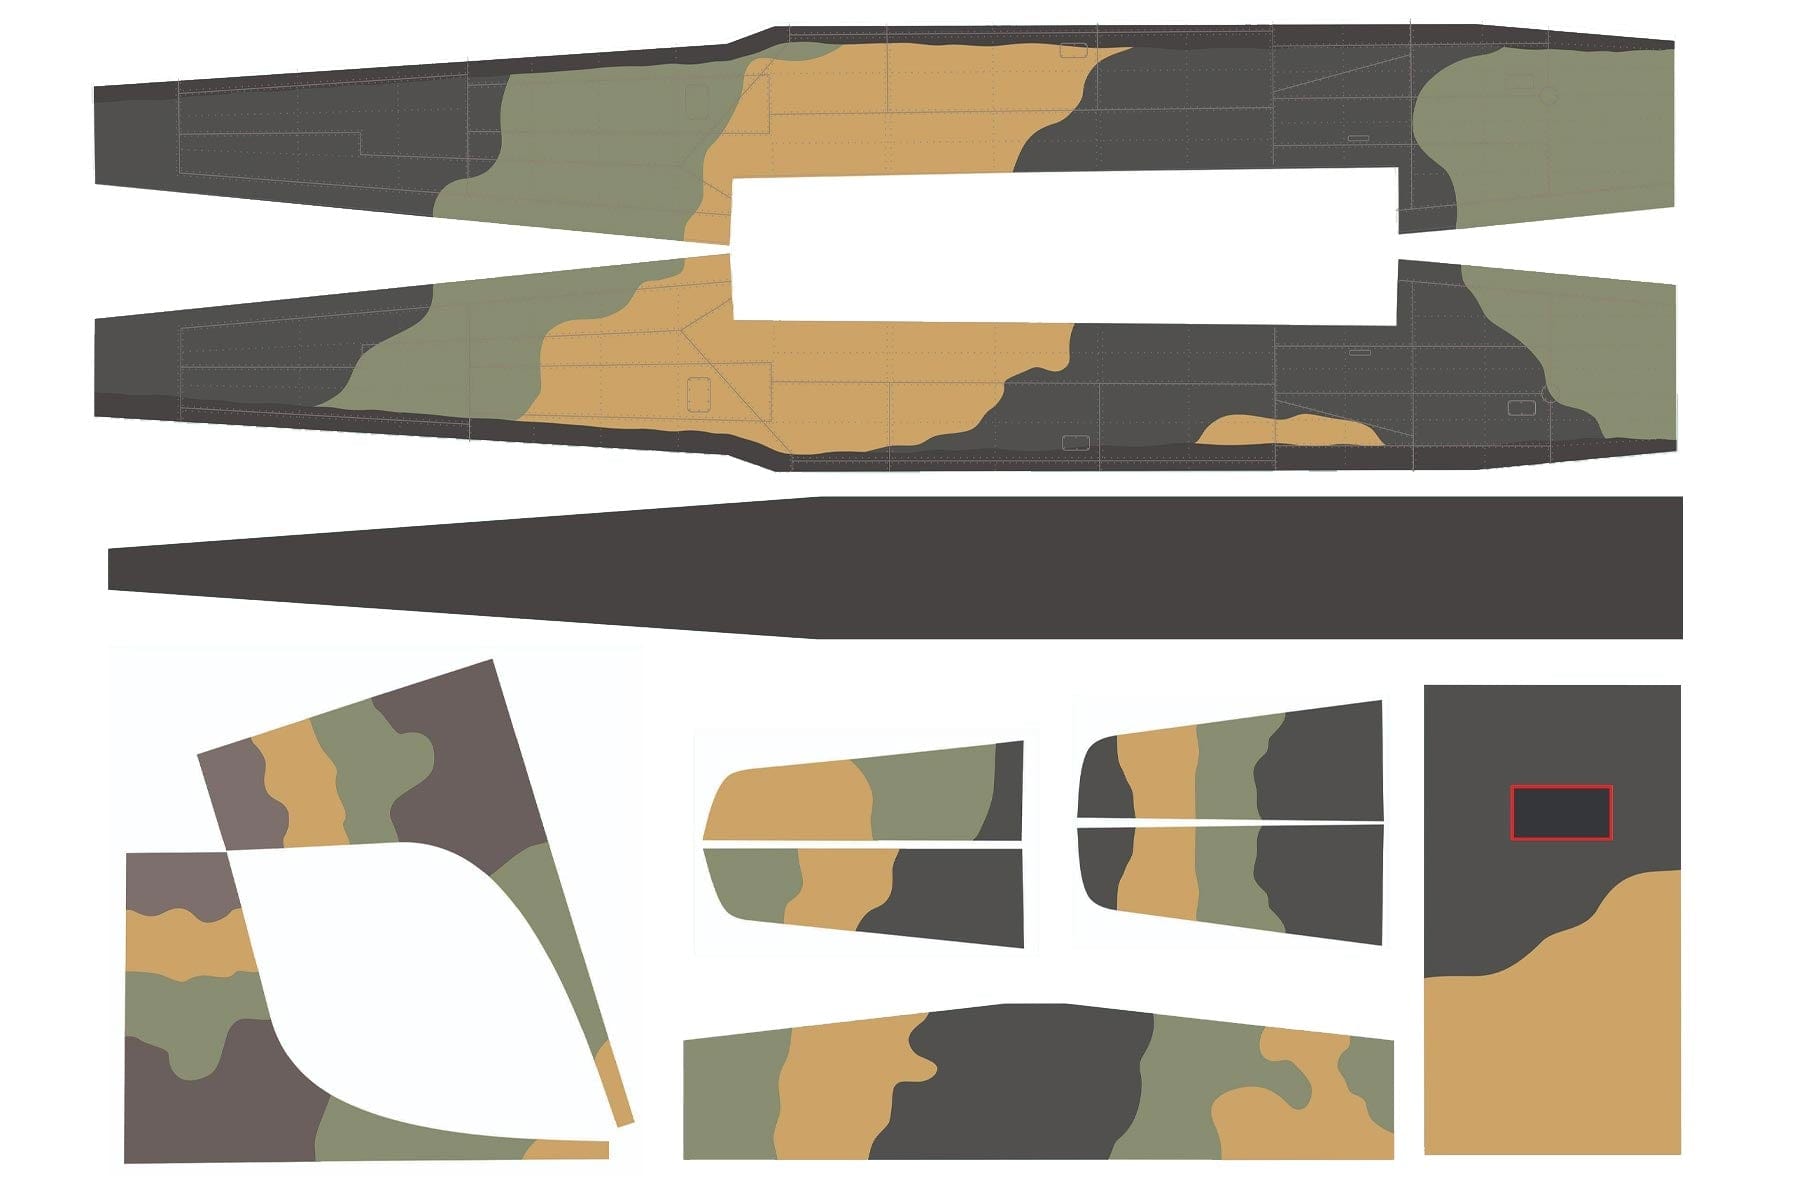 Nexa 1730mm A-26 Invader Camo Covering Set - Fuselage and Tail NXA1021-108